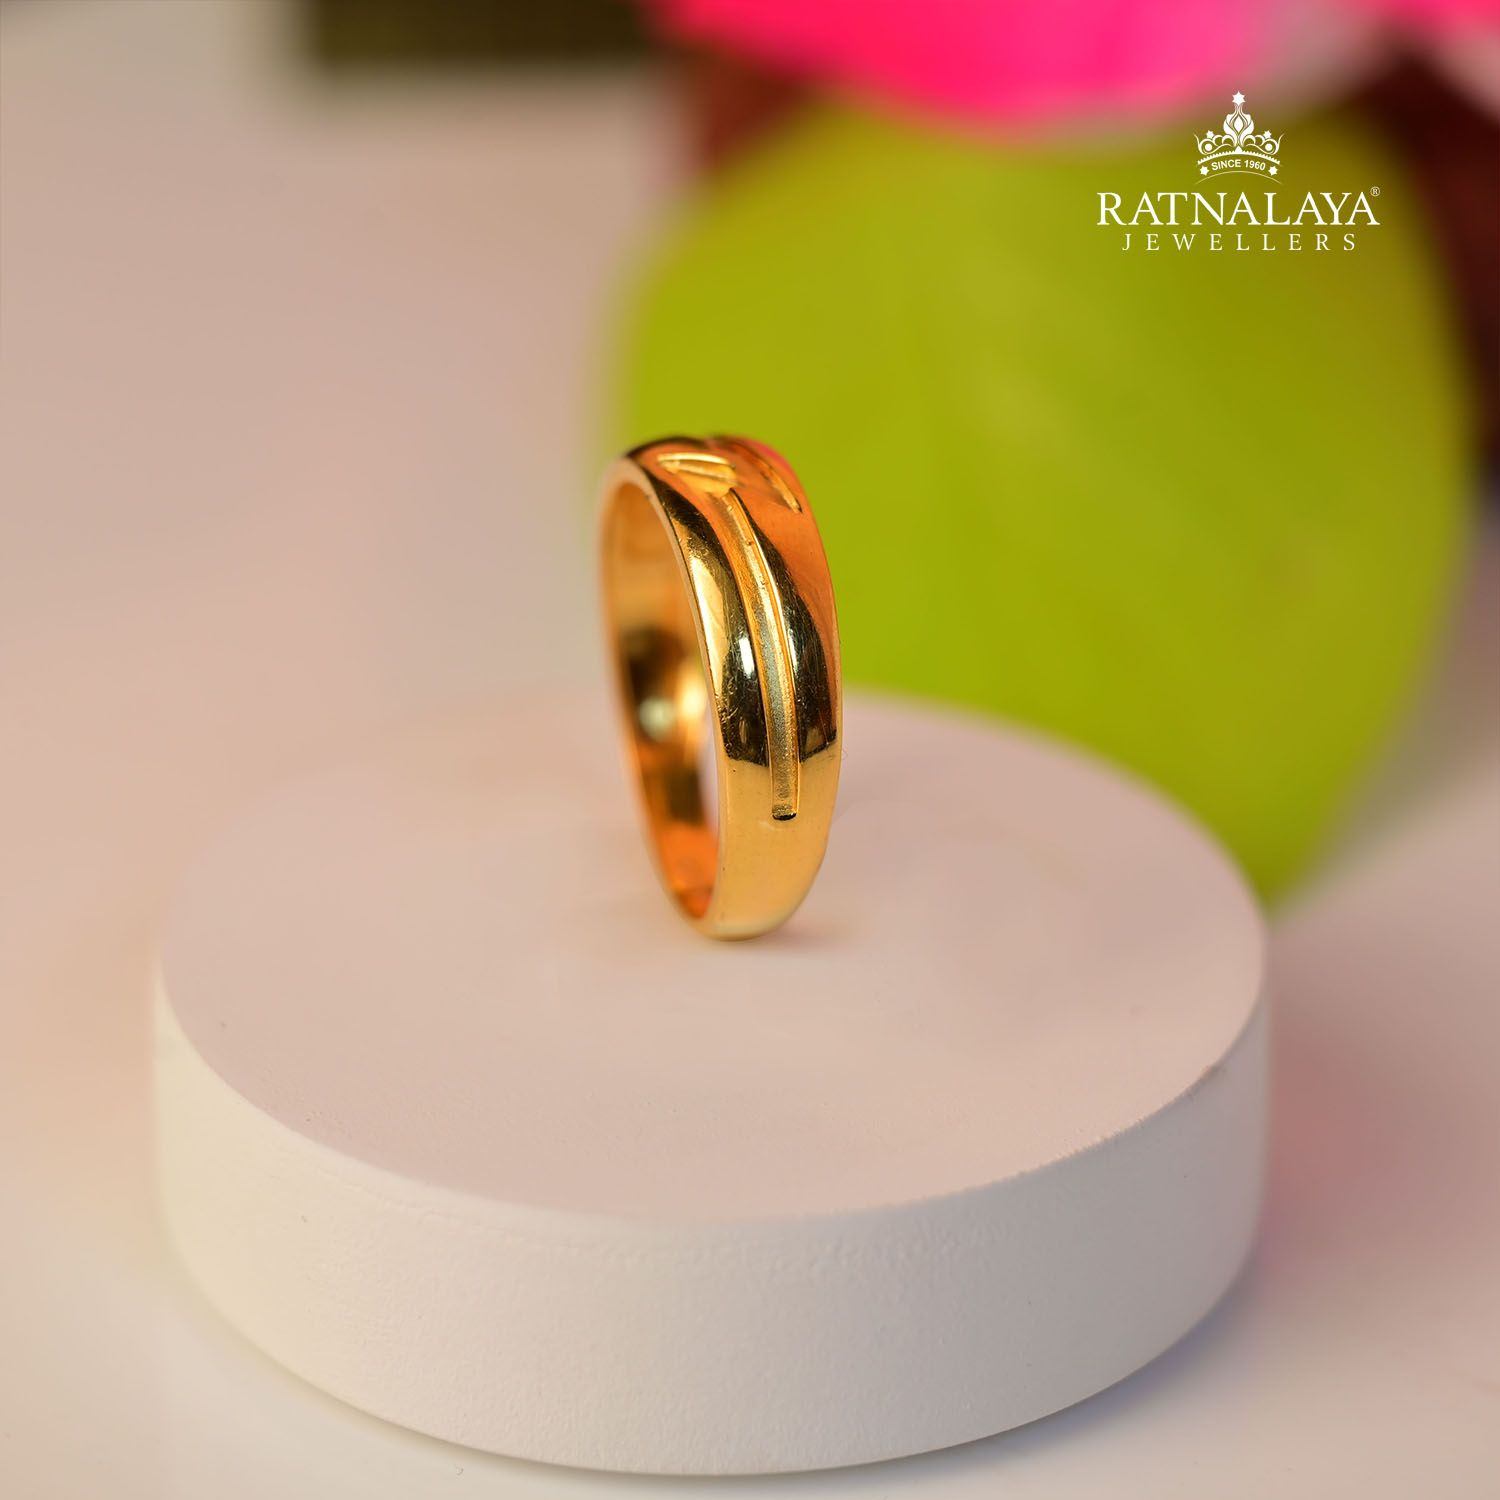 22k Gold Rings for Men - Queen of Hearts Jewelry